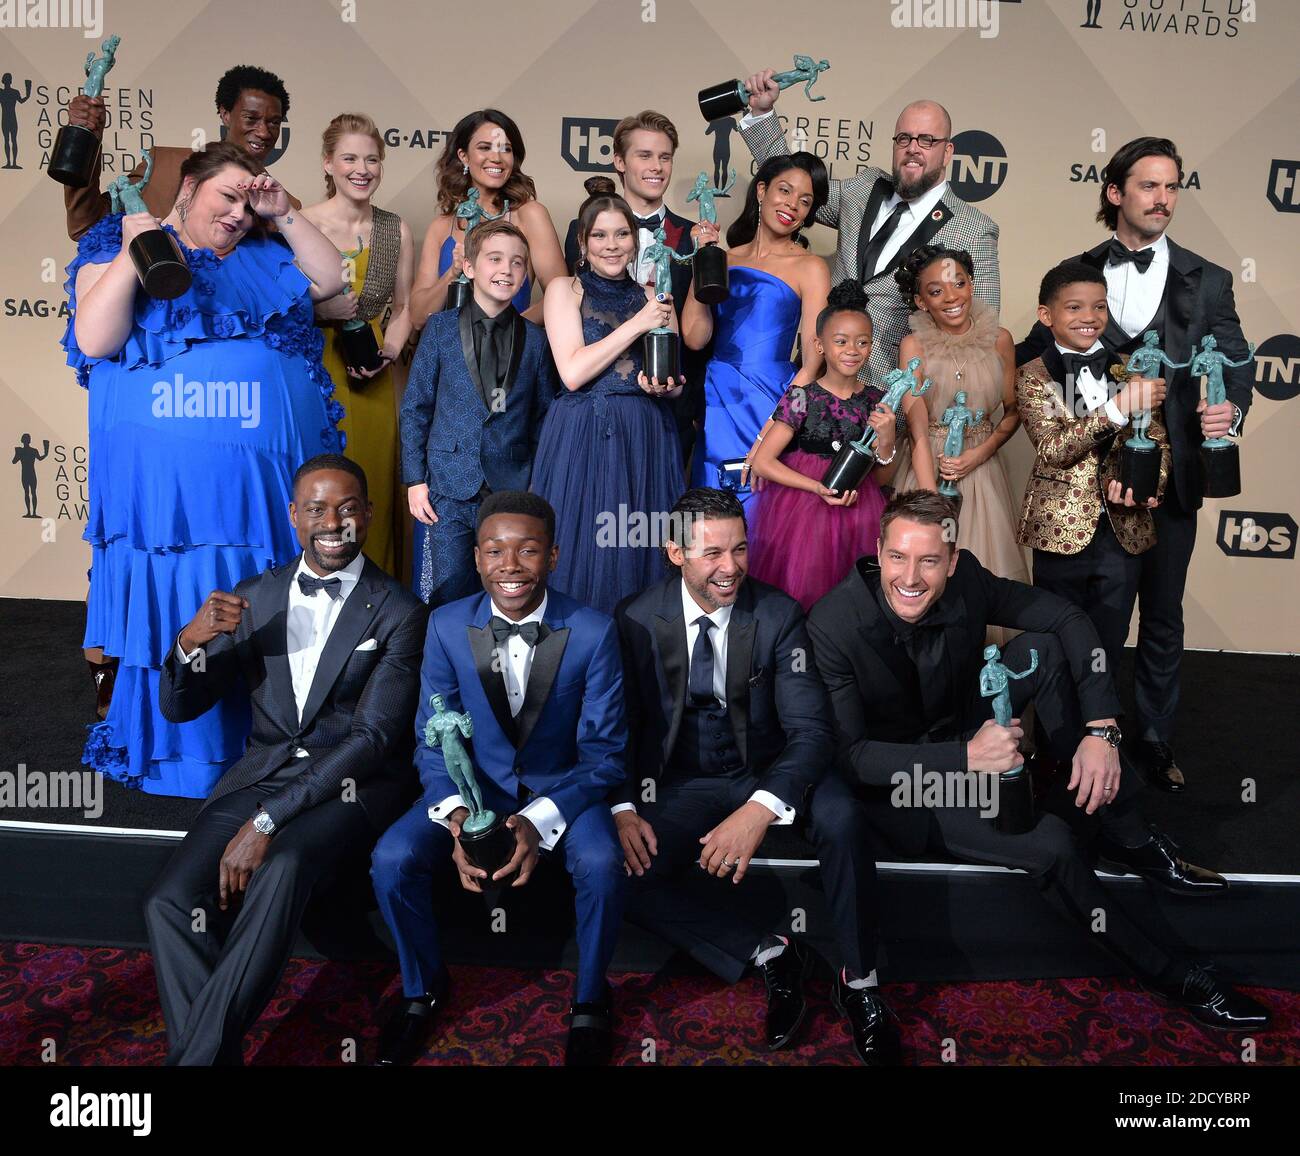 Jermel Nakia, Chrissy Metz, Alexandra Breckenridge, Mandy Moore, Hannah Zeile, Logan Shroyer, Lonnie Chavis, Chris Sullivan, Susan Kelechi Watson, Eris Baker, Milo Ventimiglia, and Faithe Herman, Sterling K. Brown, Niles Fitch, Justin Hartley, and Jon Huertas, winners of Outstanding Performance by an Ensemble in a Drama Series for 'This Is Us', pose in the press room during the 24th Annual Screen Actors Guild Awards at The Shrine Auditorium on January 21, 2018 in Los Angeles, CA, USA. Photo by Lionel Hahn/ABACAPRESS.com Stock Photo